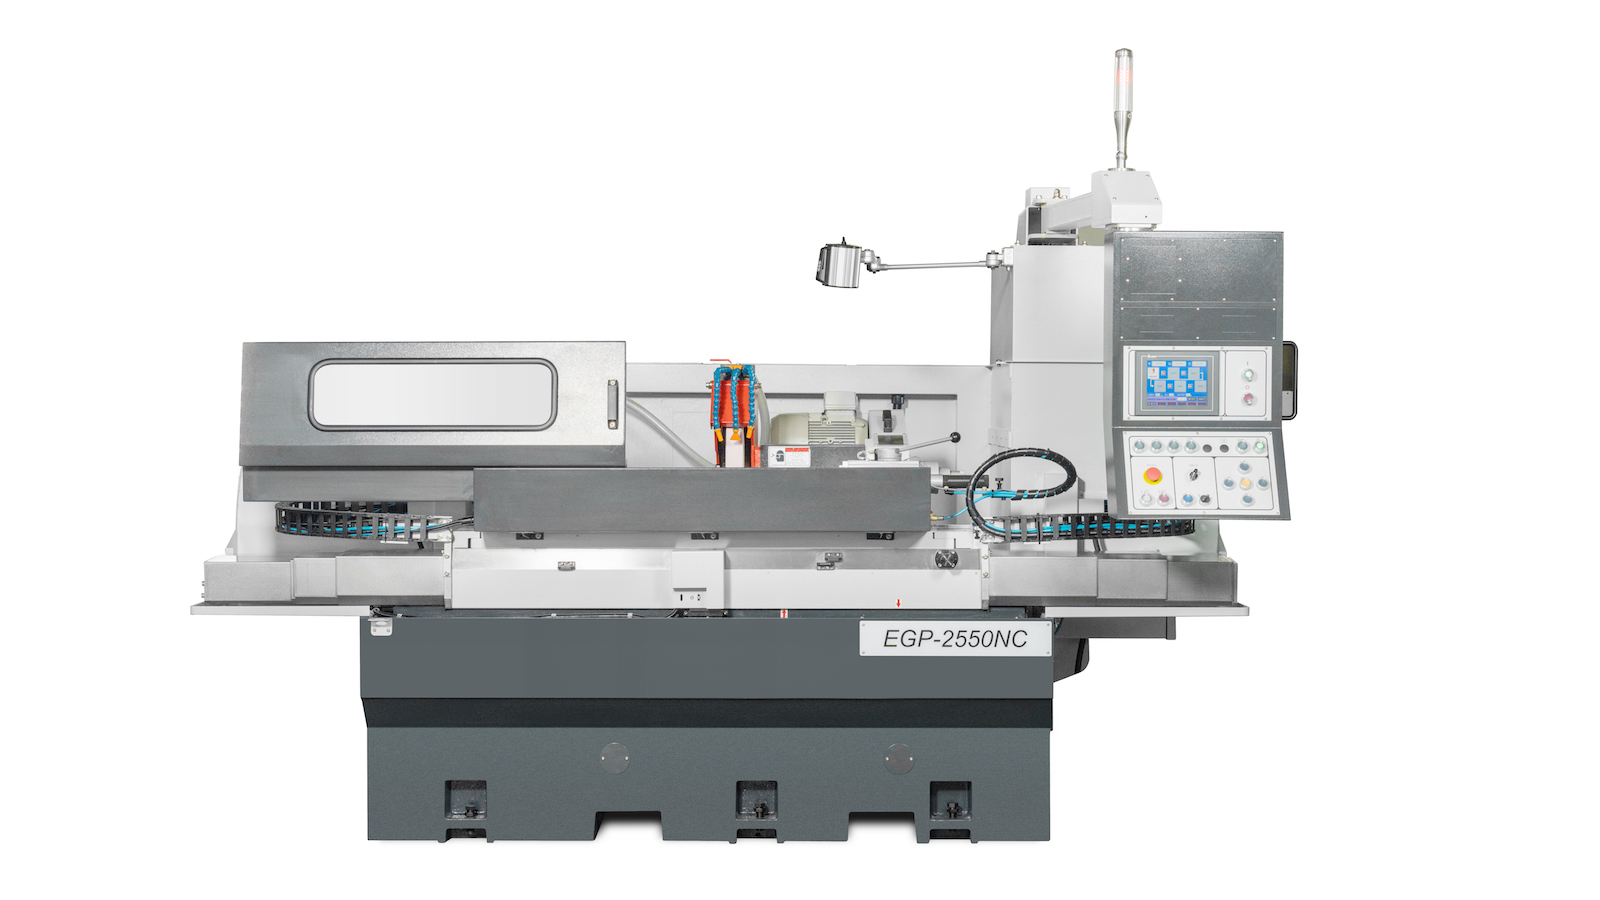 UK Manufacturers of Automatic Infeed CNC Grinders